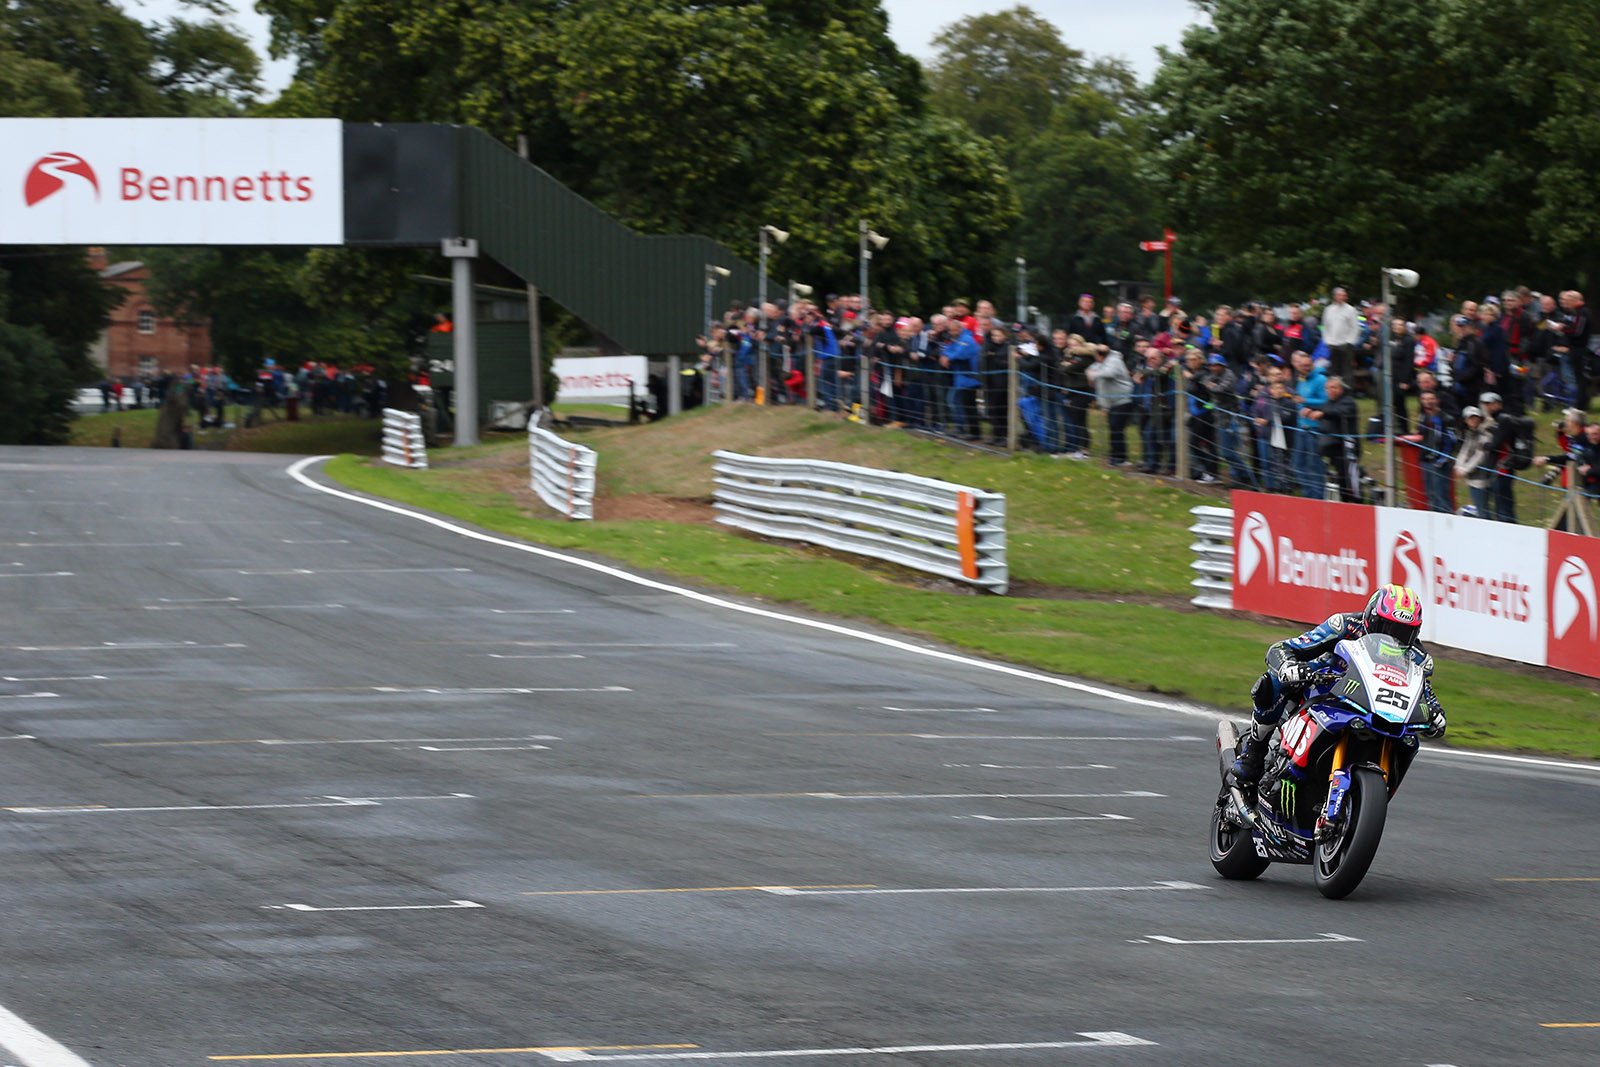 Josh Brookes will be disappointed with the weekends results credit Tim Keeton (Impact Images Photography)